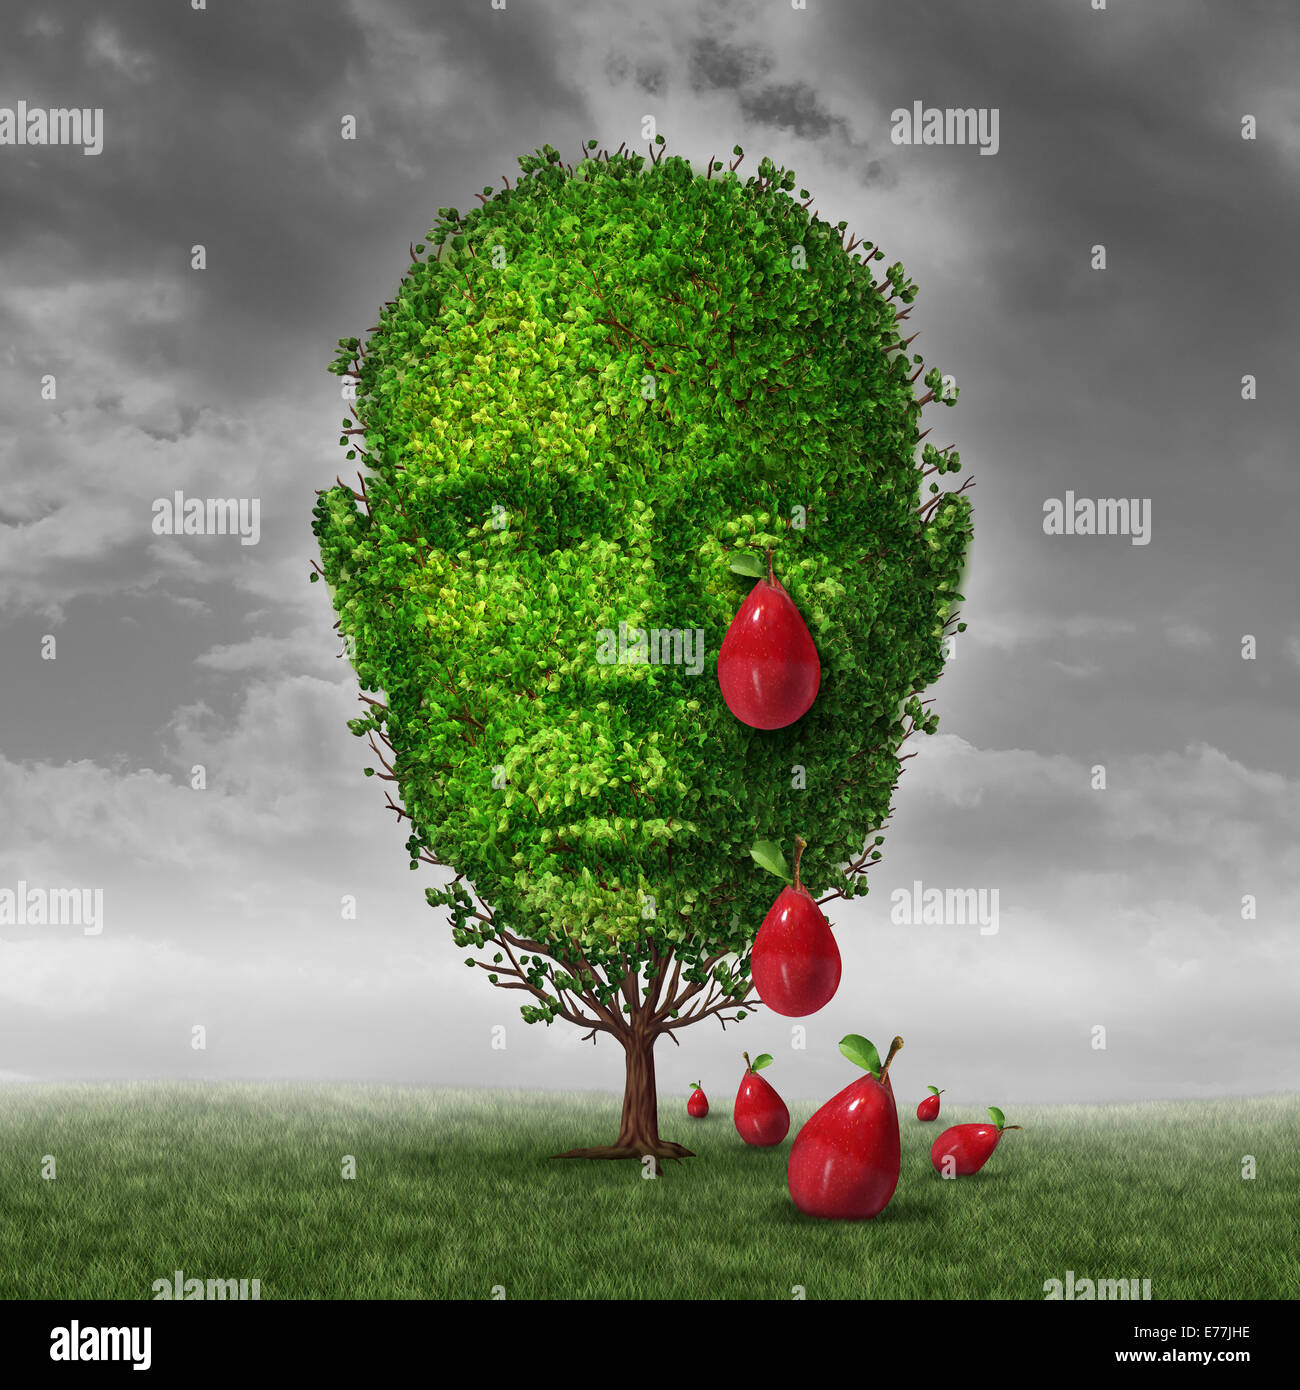 Depression and mental health concept as a tree shaped as a human head that is crying fruit shaped as tear drops as a metaphor for being depressed postpartum or sadness in the mature age. Stock Photo